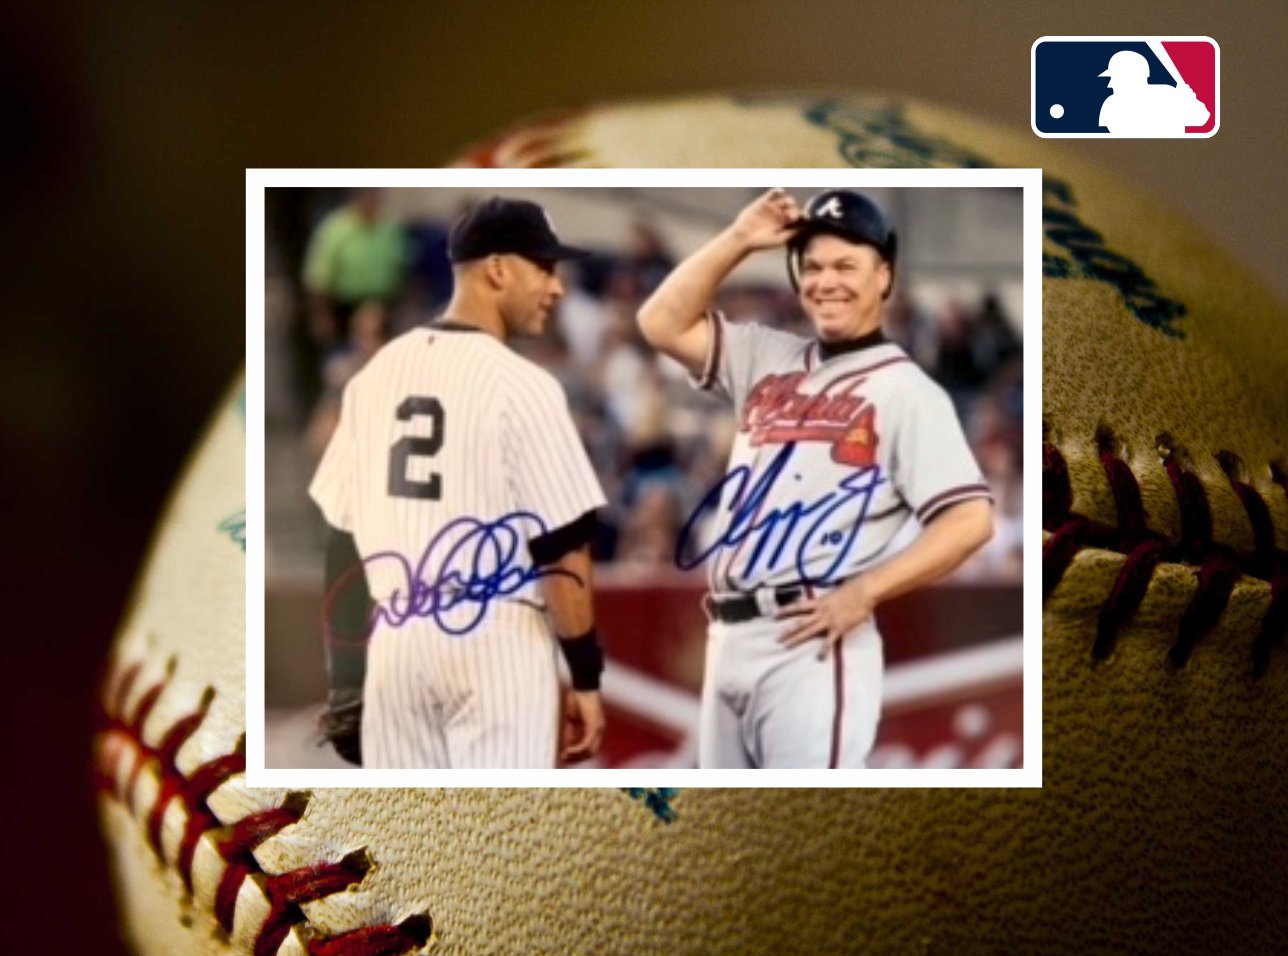 Derek Jeter and Chipper Jones 8 x 10 photo signed with proof